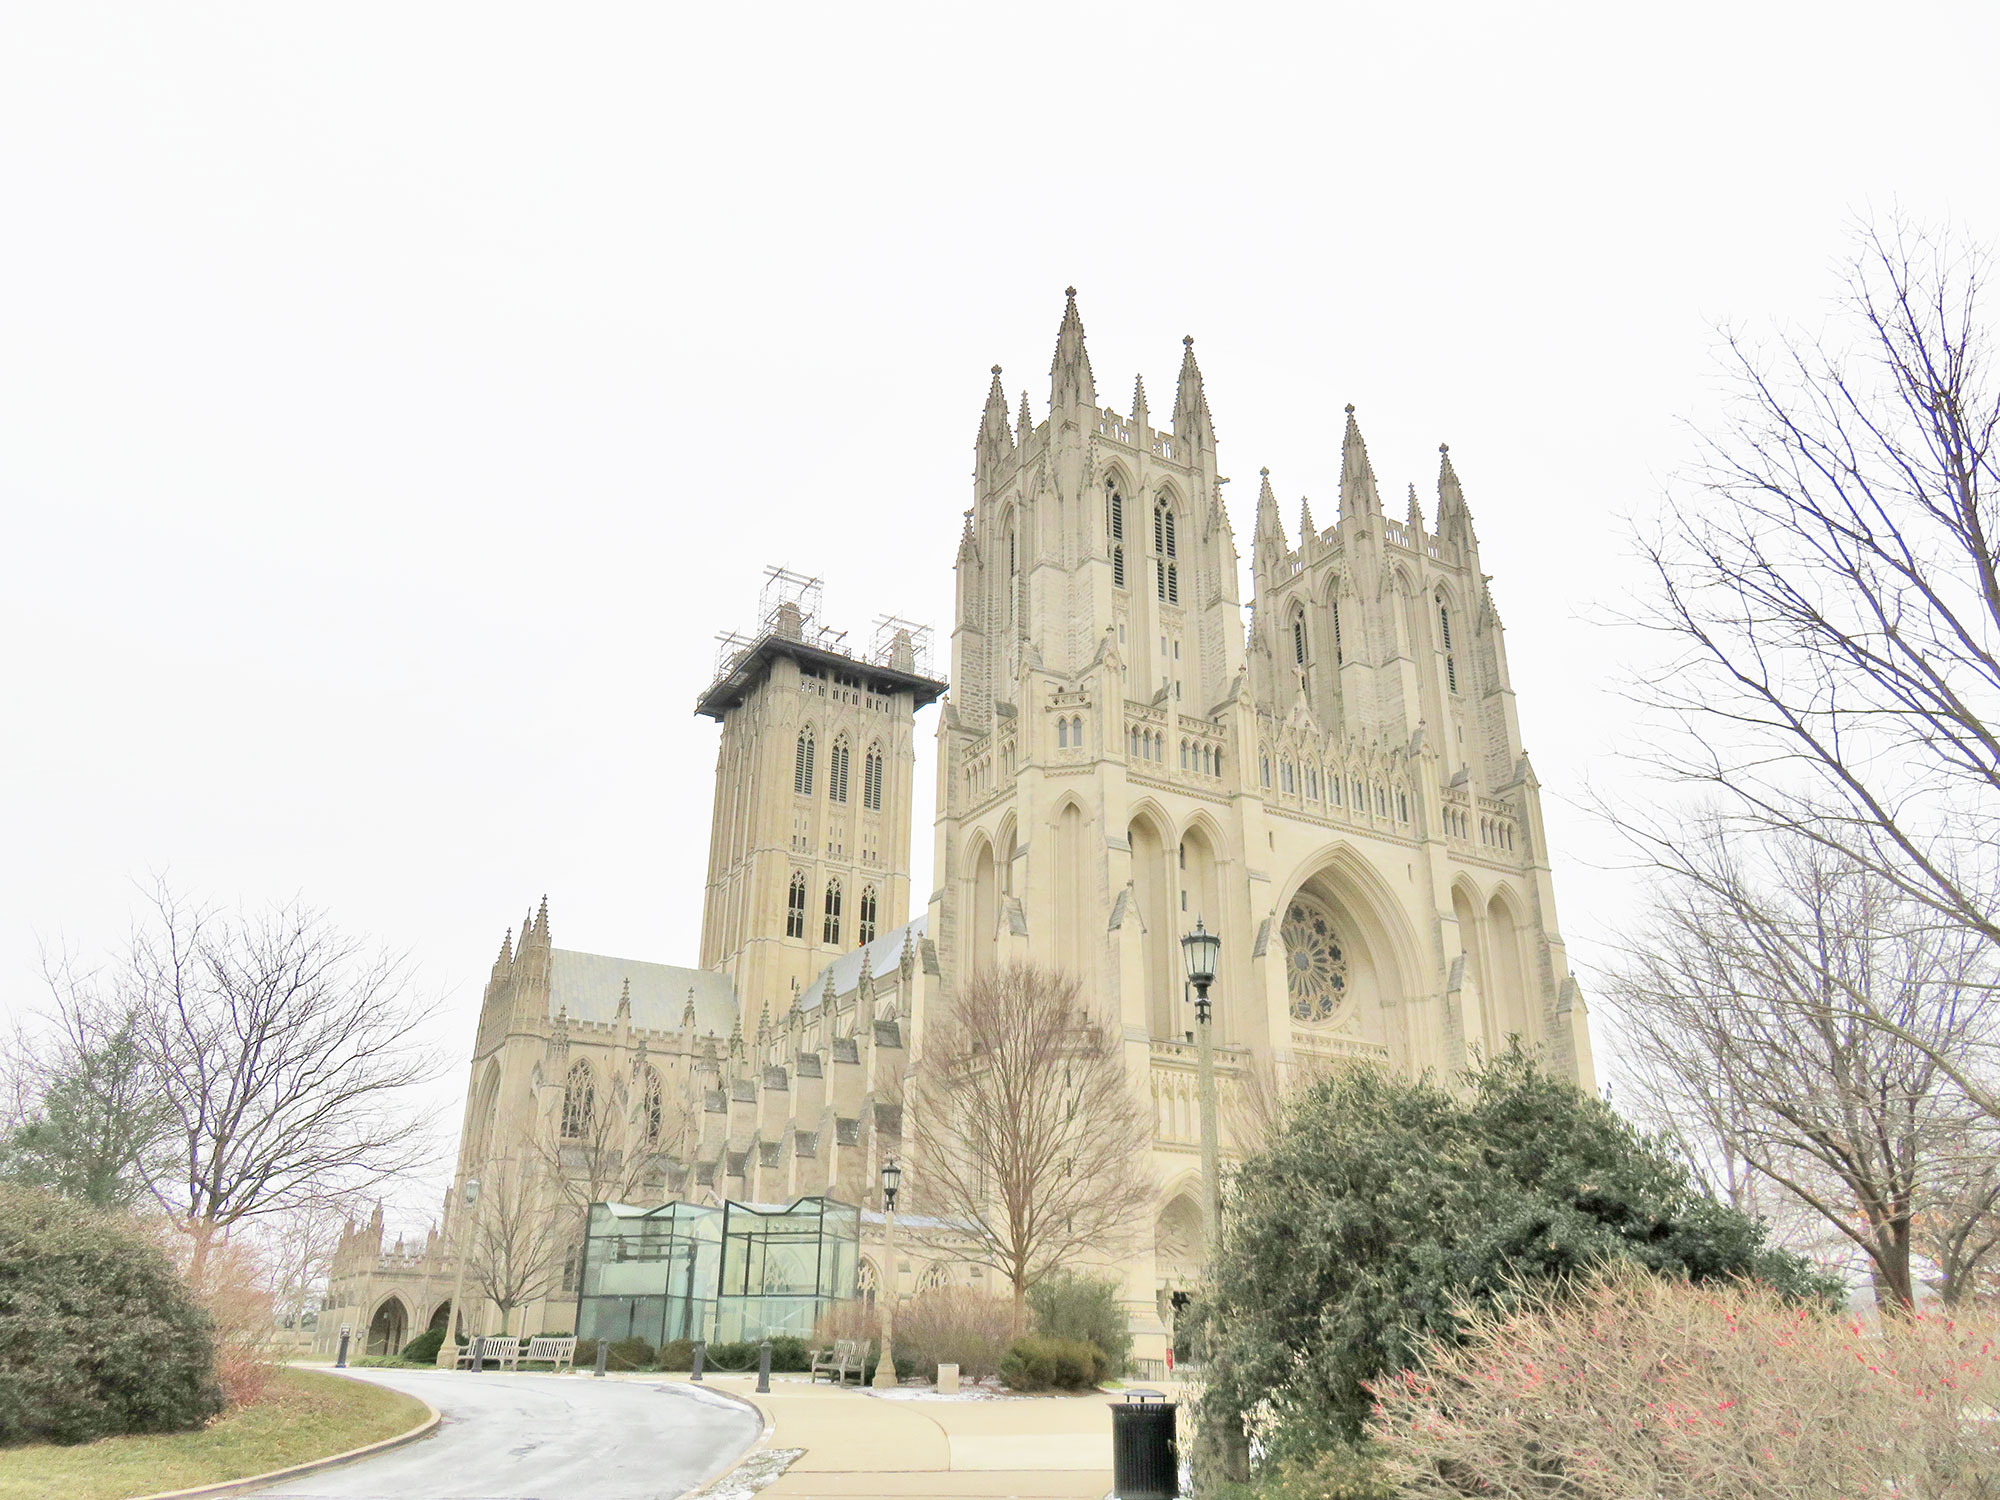 The front entrance of the Washington National Cathedral, near Georgetown.